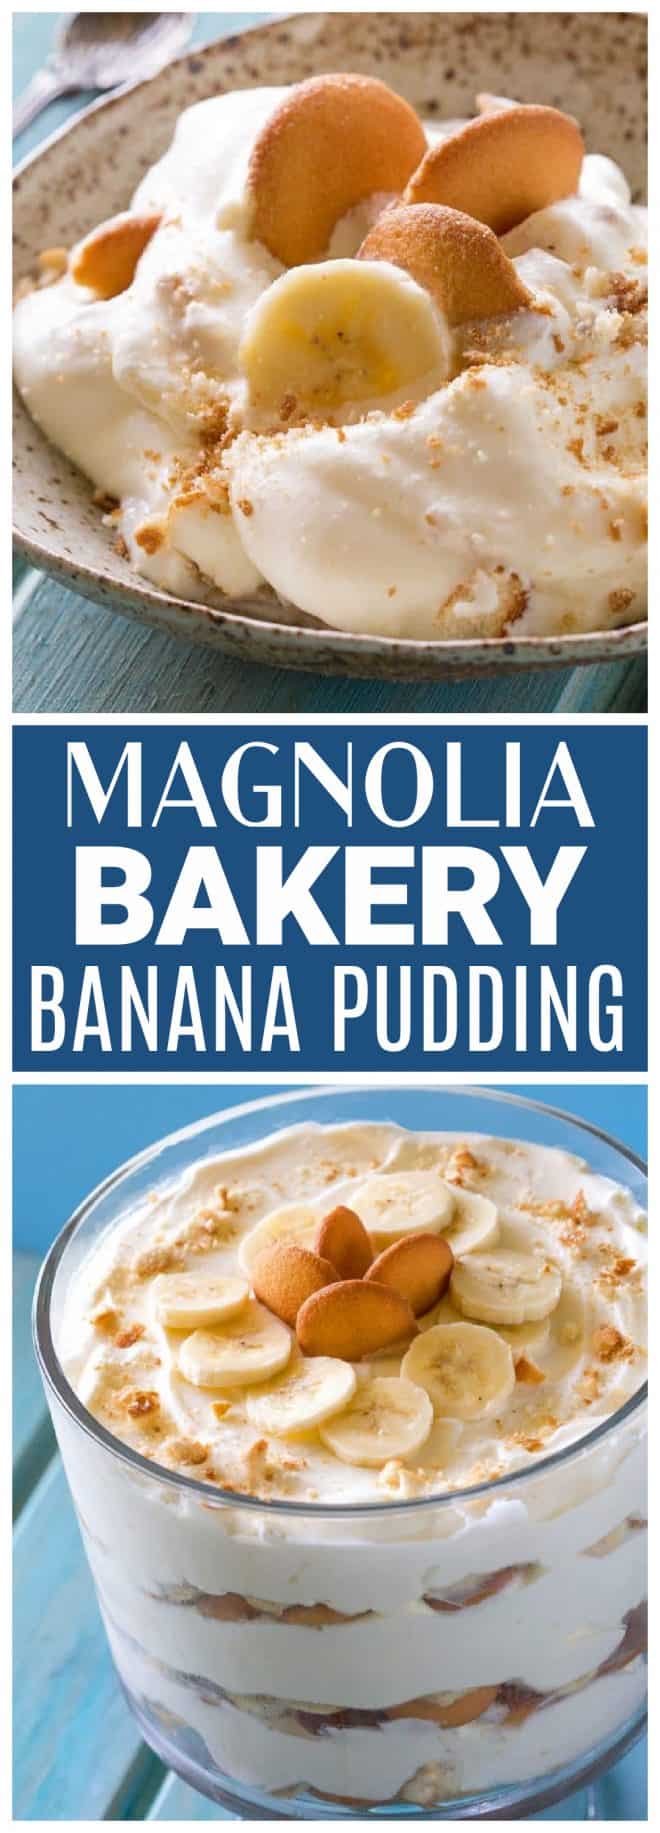 This Magnolia Bakery Banana Pudding Recipe has layers of creamy pudding, bananas, and Nilla wafers. It's heaven and way easier than you think! This is the ACTUAL banana pudding recipe from their cookbook. #magnolia #bakery #banana #pudding #recipe #dessert